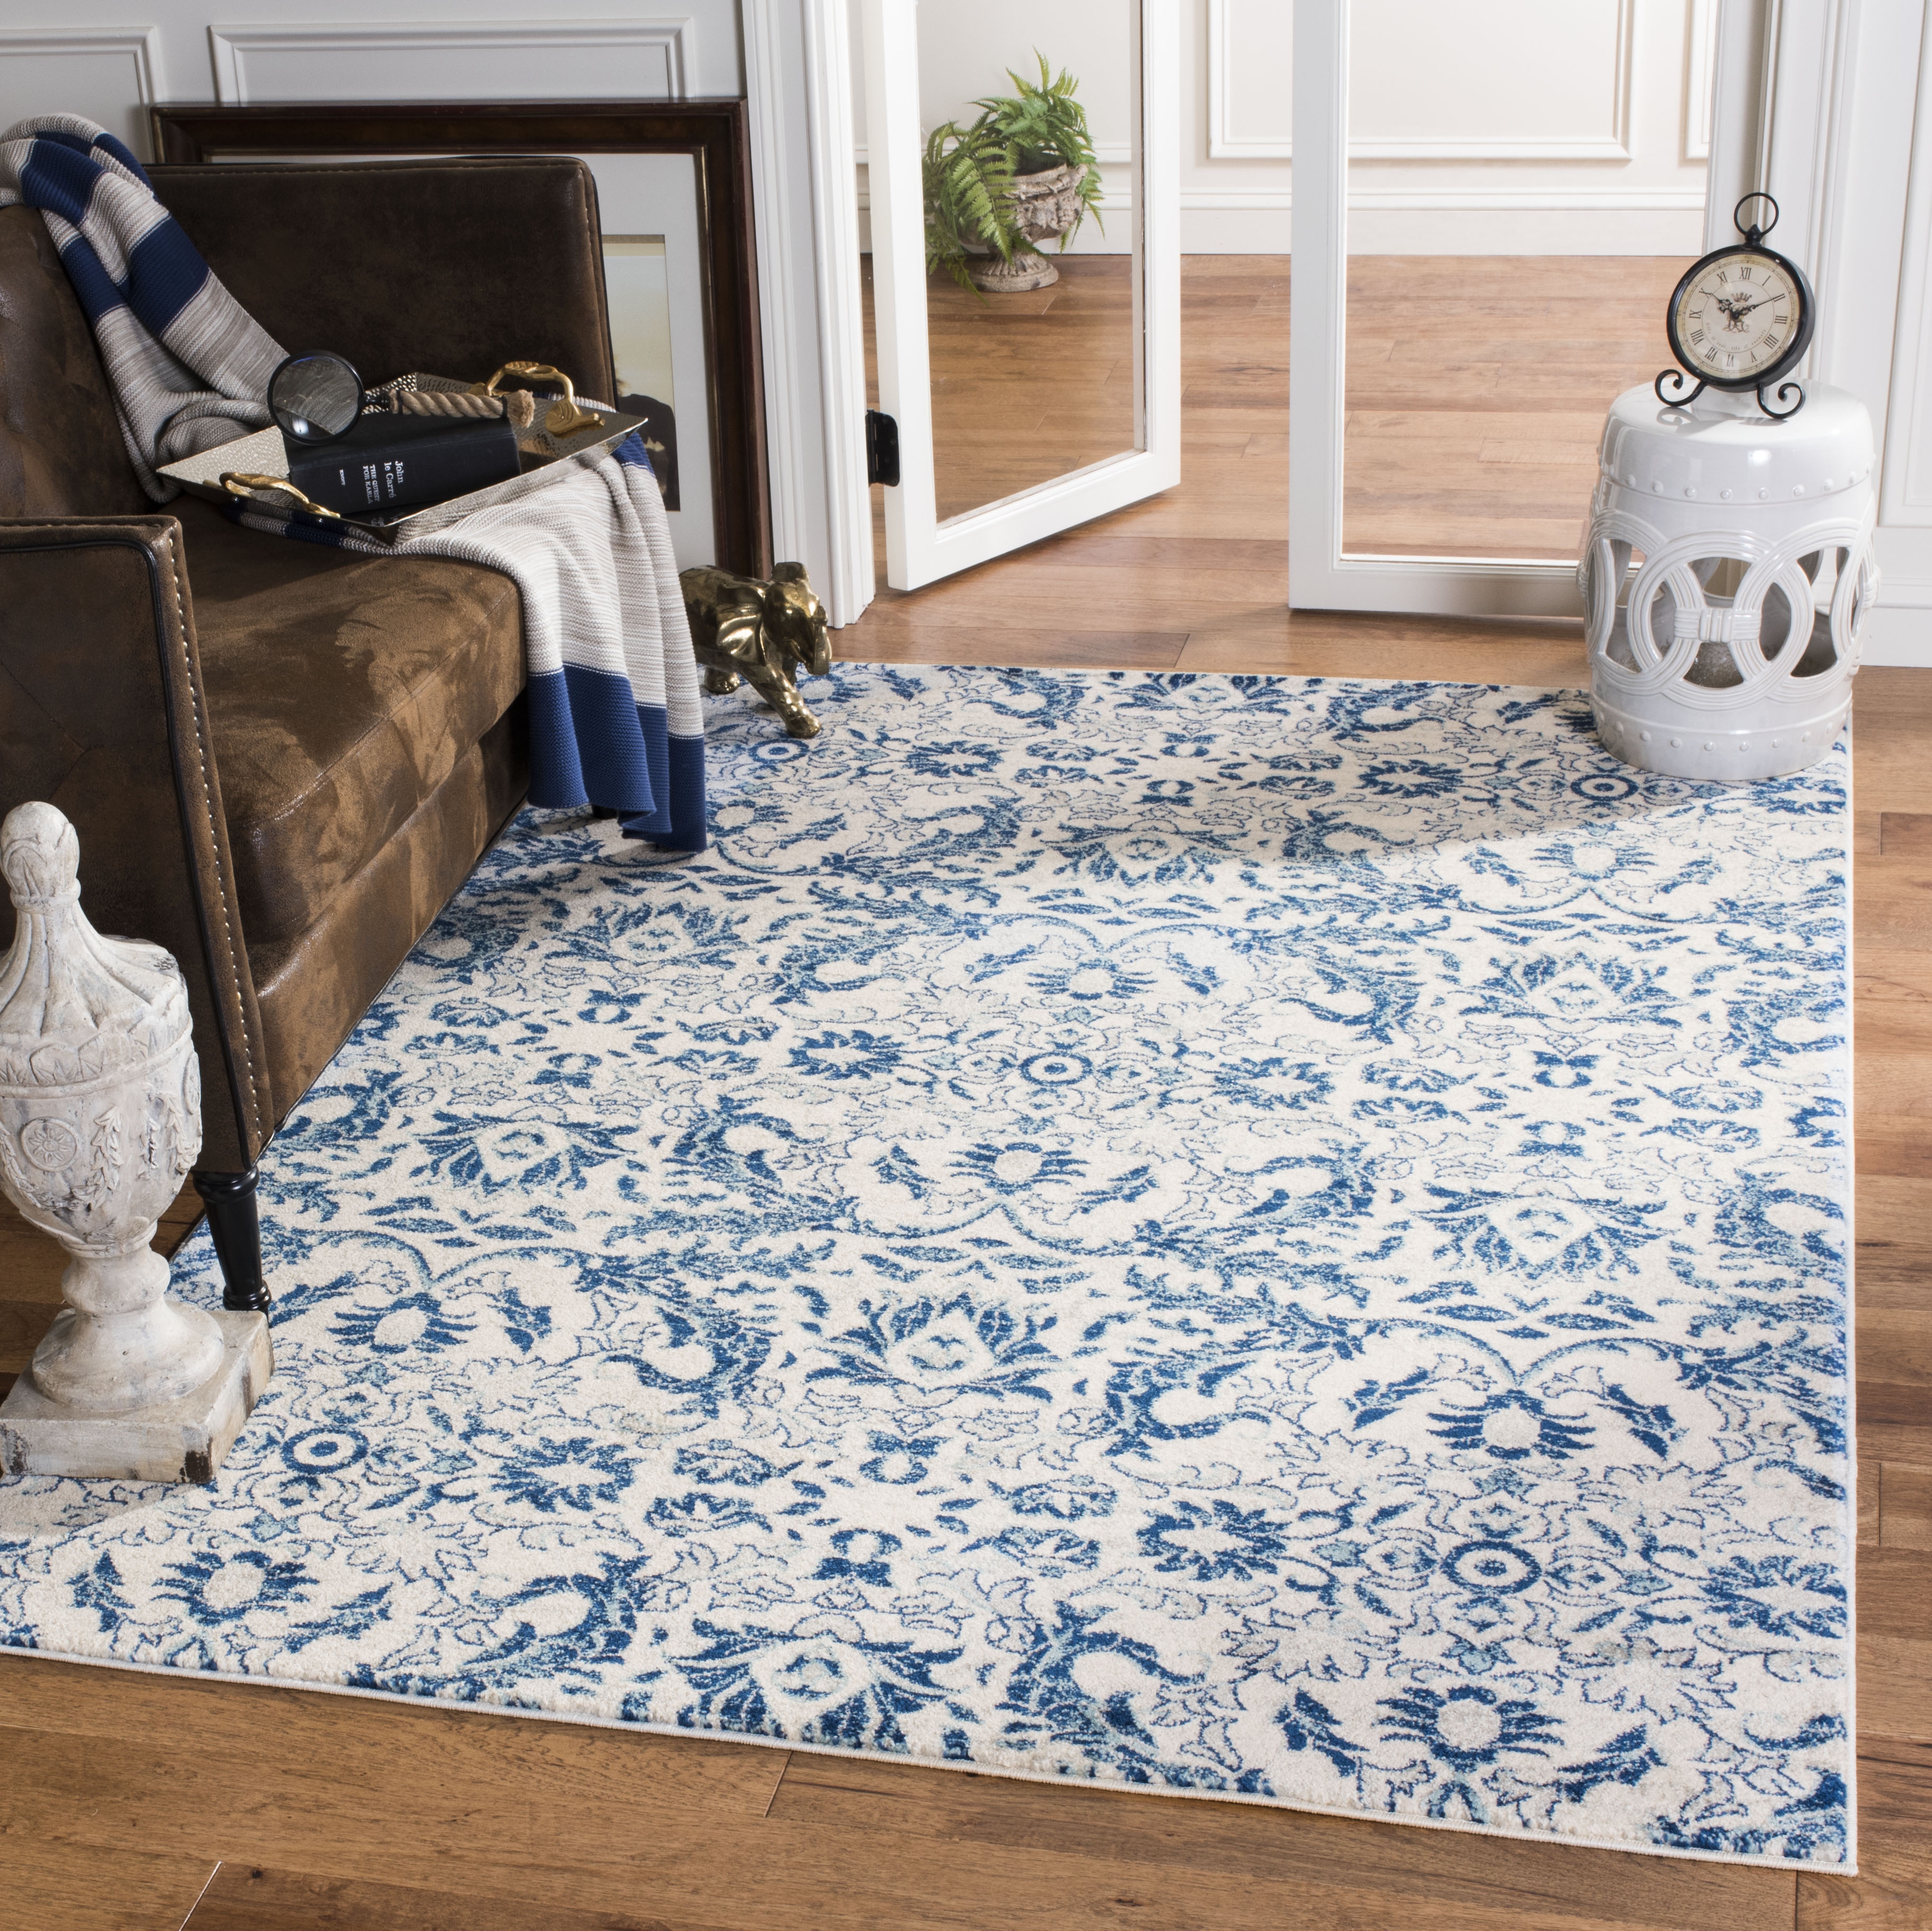 Arlo Home Woven Area Rug, EVK238C, Ivory/Blue,  6' 7" X 9' - Image 1